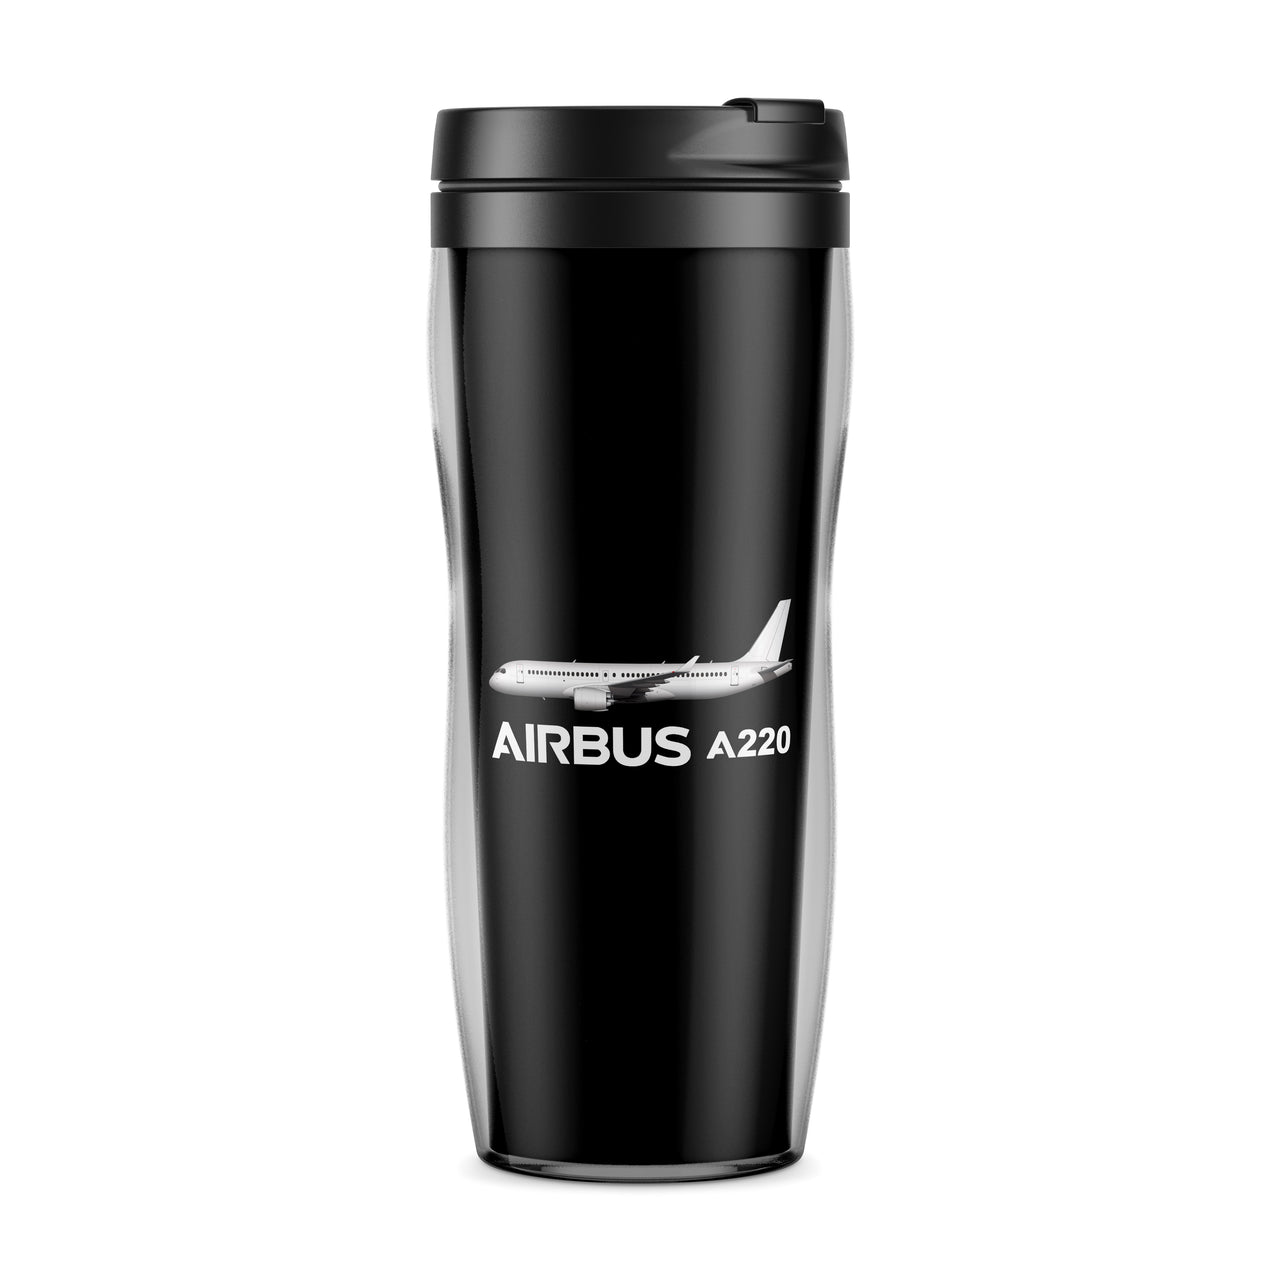 The Airbus A220 Designed Travel Mugs